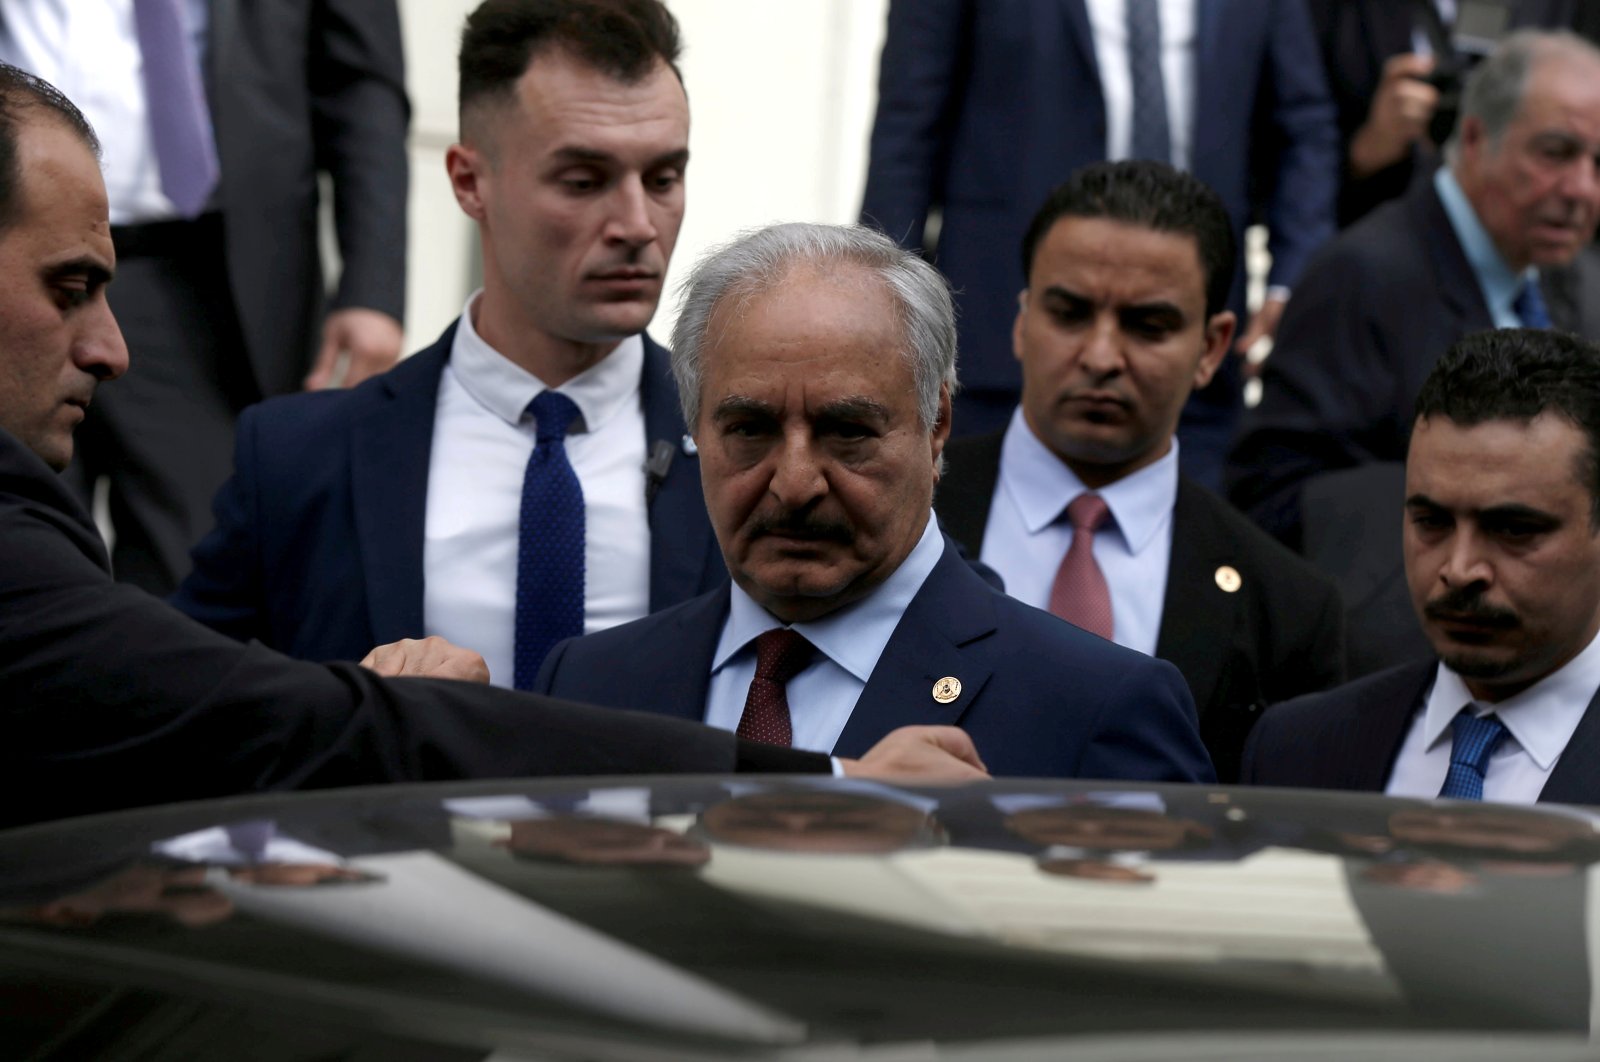 Libya's self-proclaimed Gen. Khalifa Haftar gets into a car after a meeting with Greek Foreign Minister Nikos Dendias at the Foreign Ministry in Athens, Greece, January 17, 2020. (Reuters Photo)